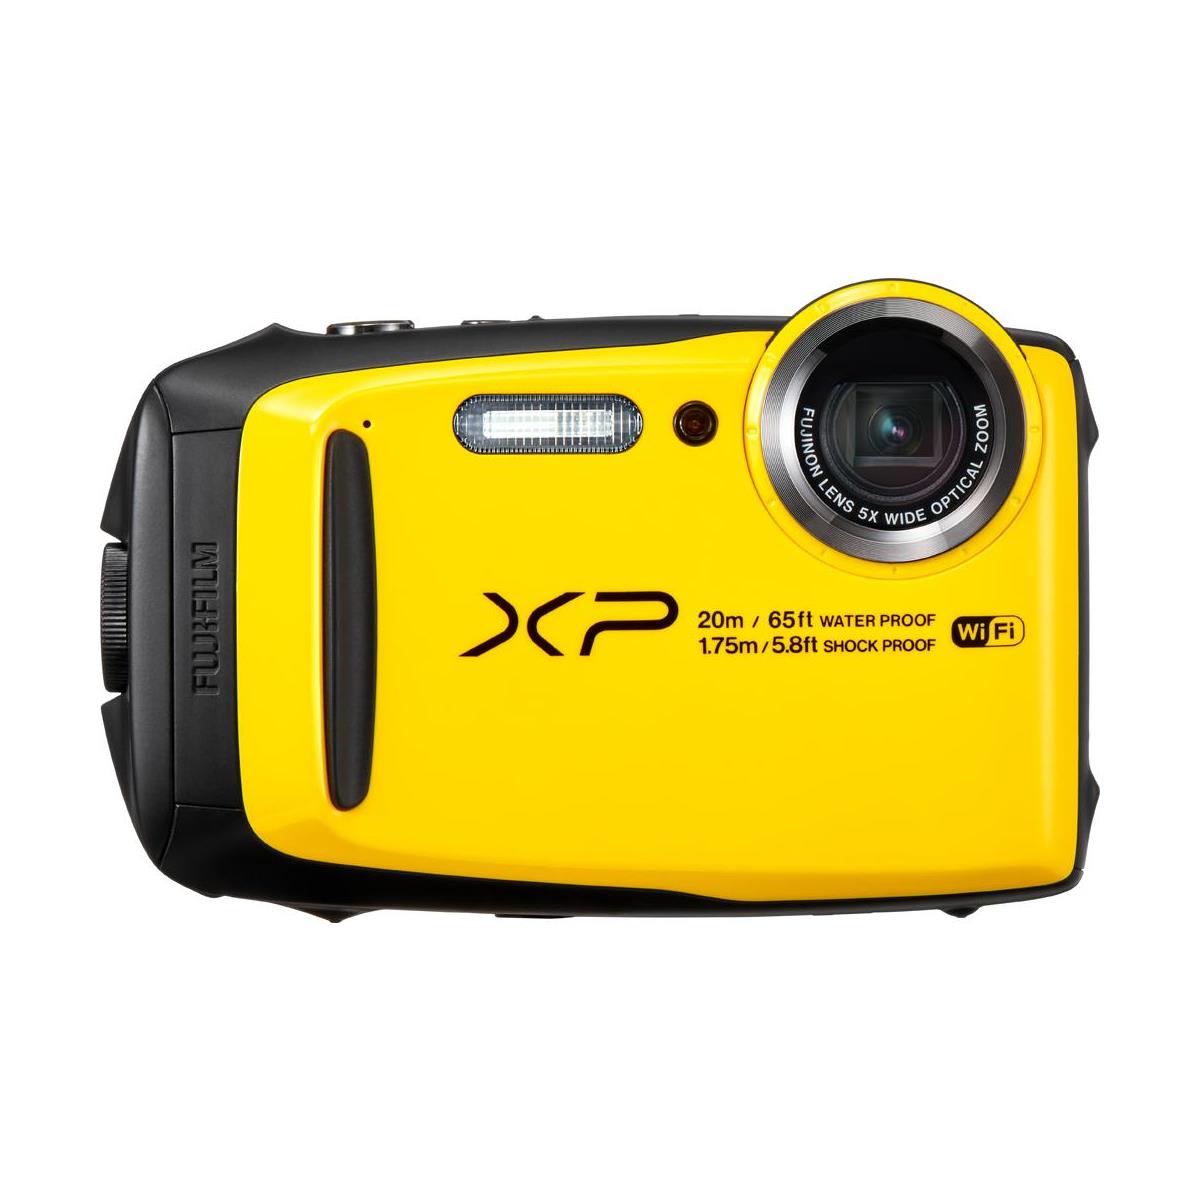 New Fujifilm Compact Rugged Camera does Cinemagraphs; Premium Metals for X-Cameras – ALC